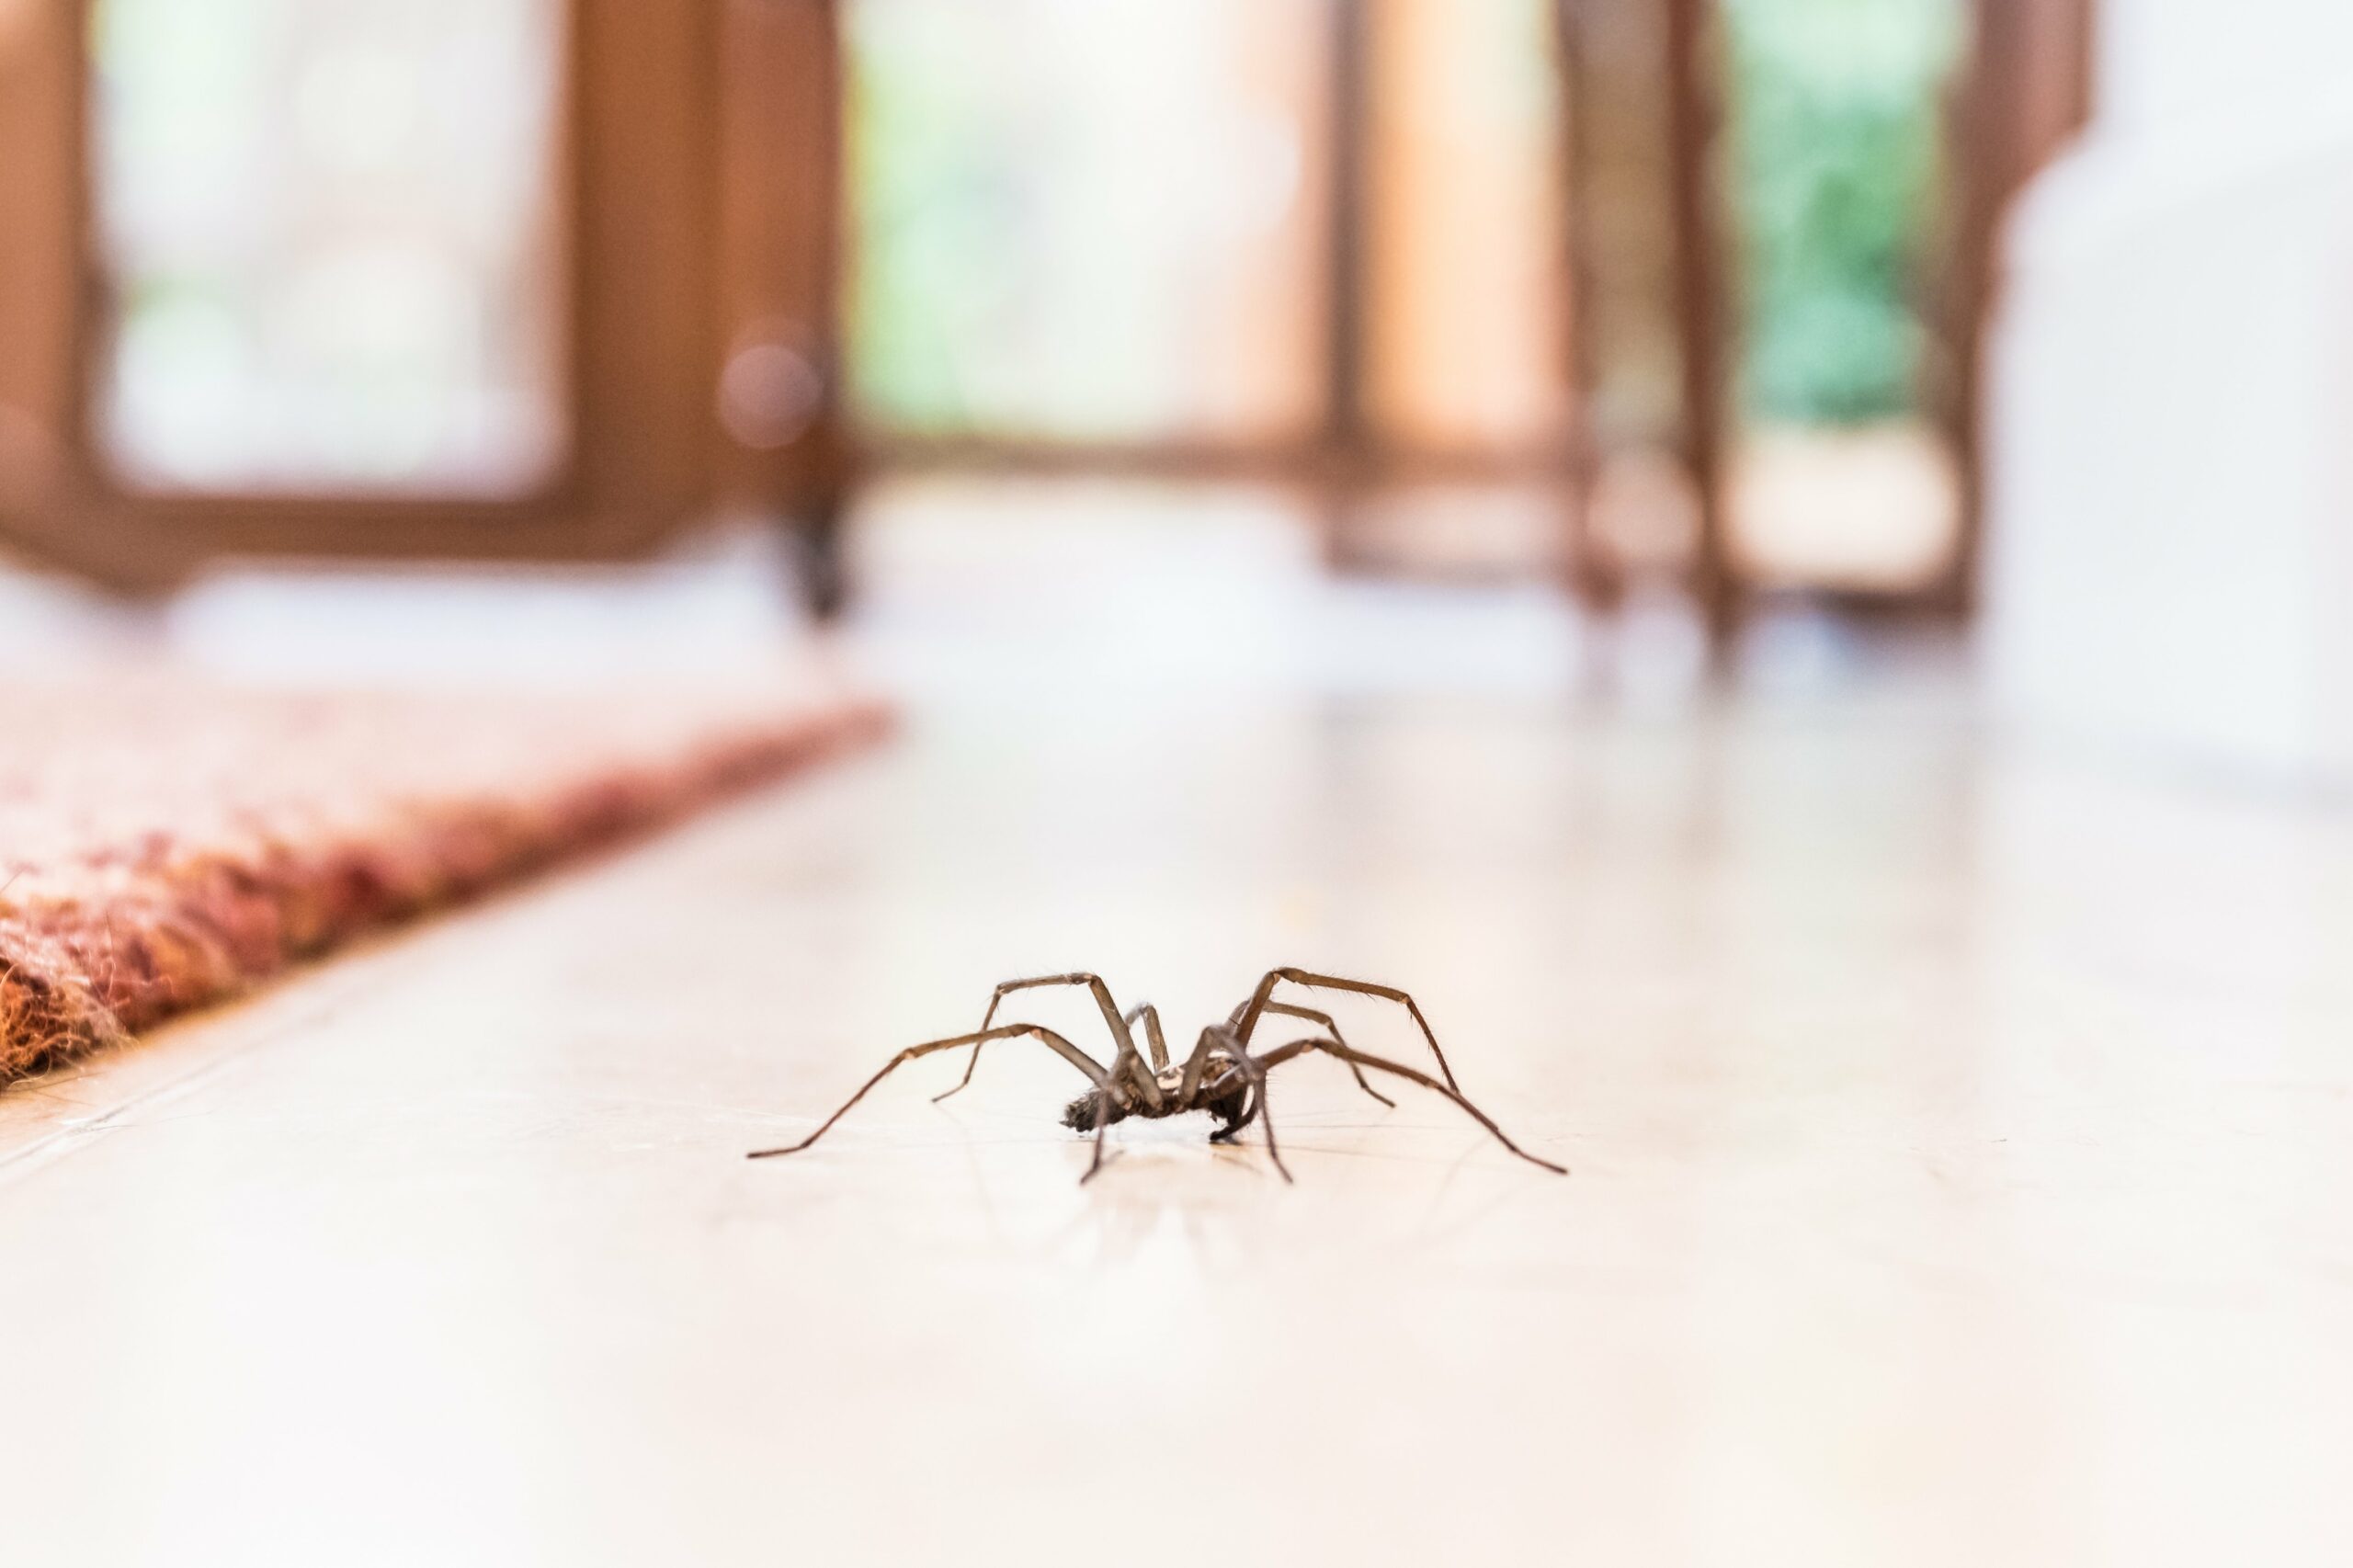 Spider on the floor of a home.